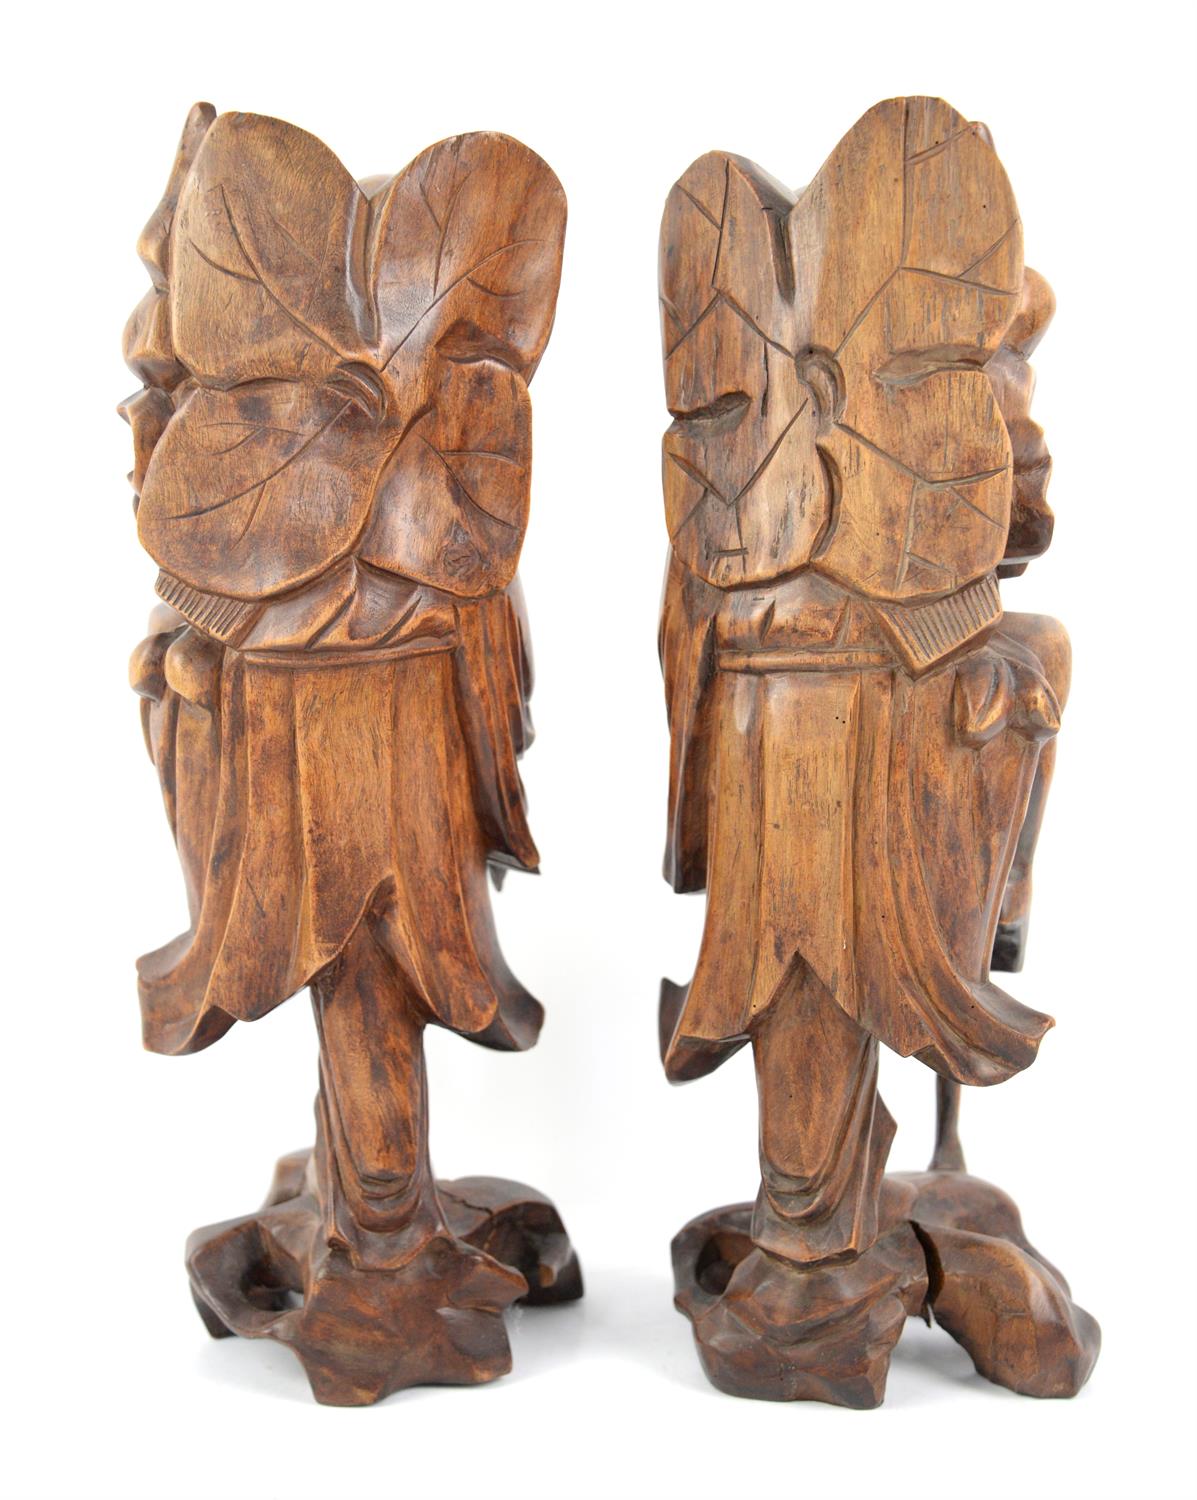 A pair of Taoist Chinese wooden sculptures representing  The immortal Li Tieguai.  34 cm High - Image 2 of 2